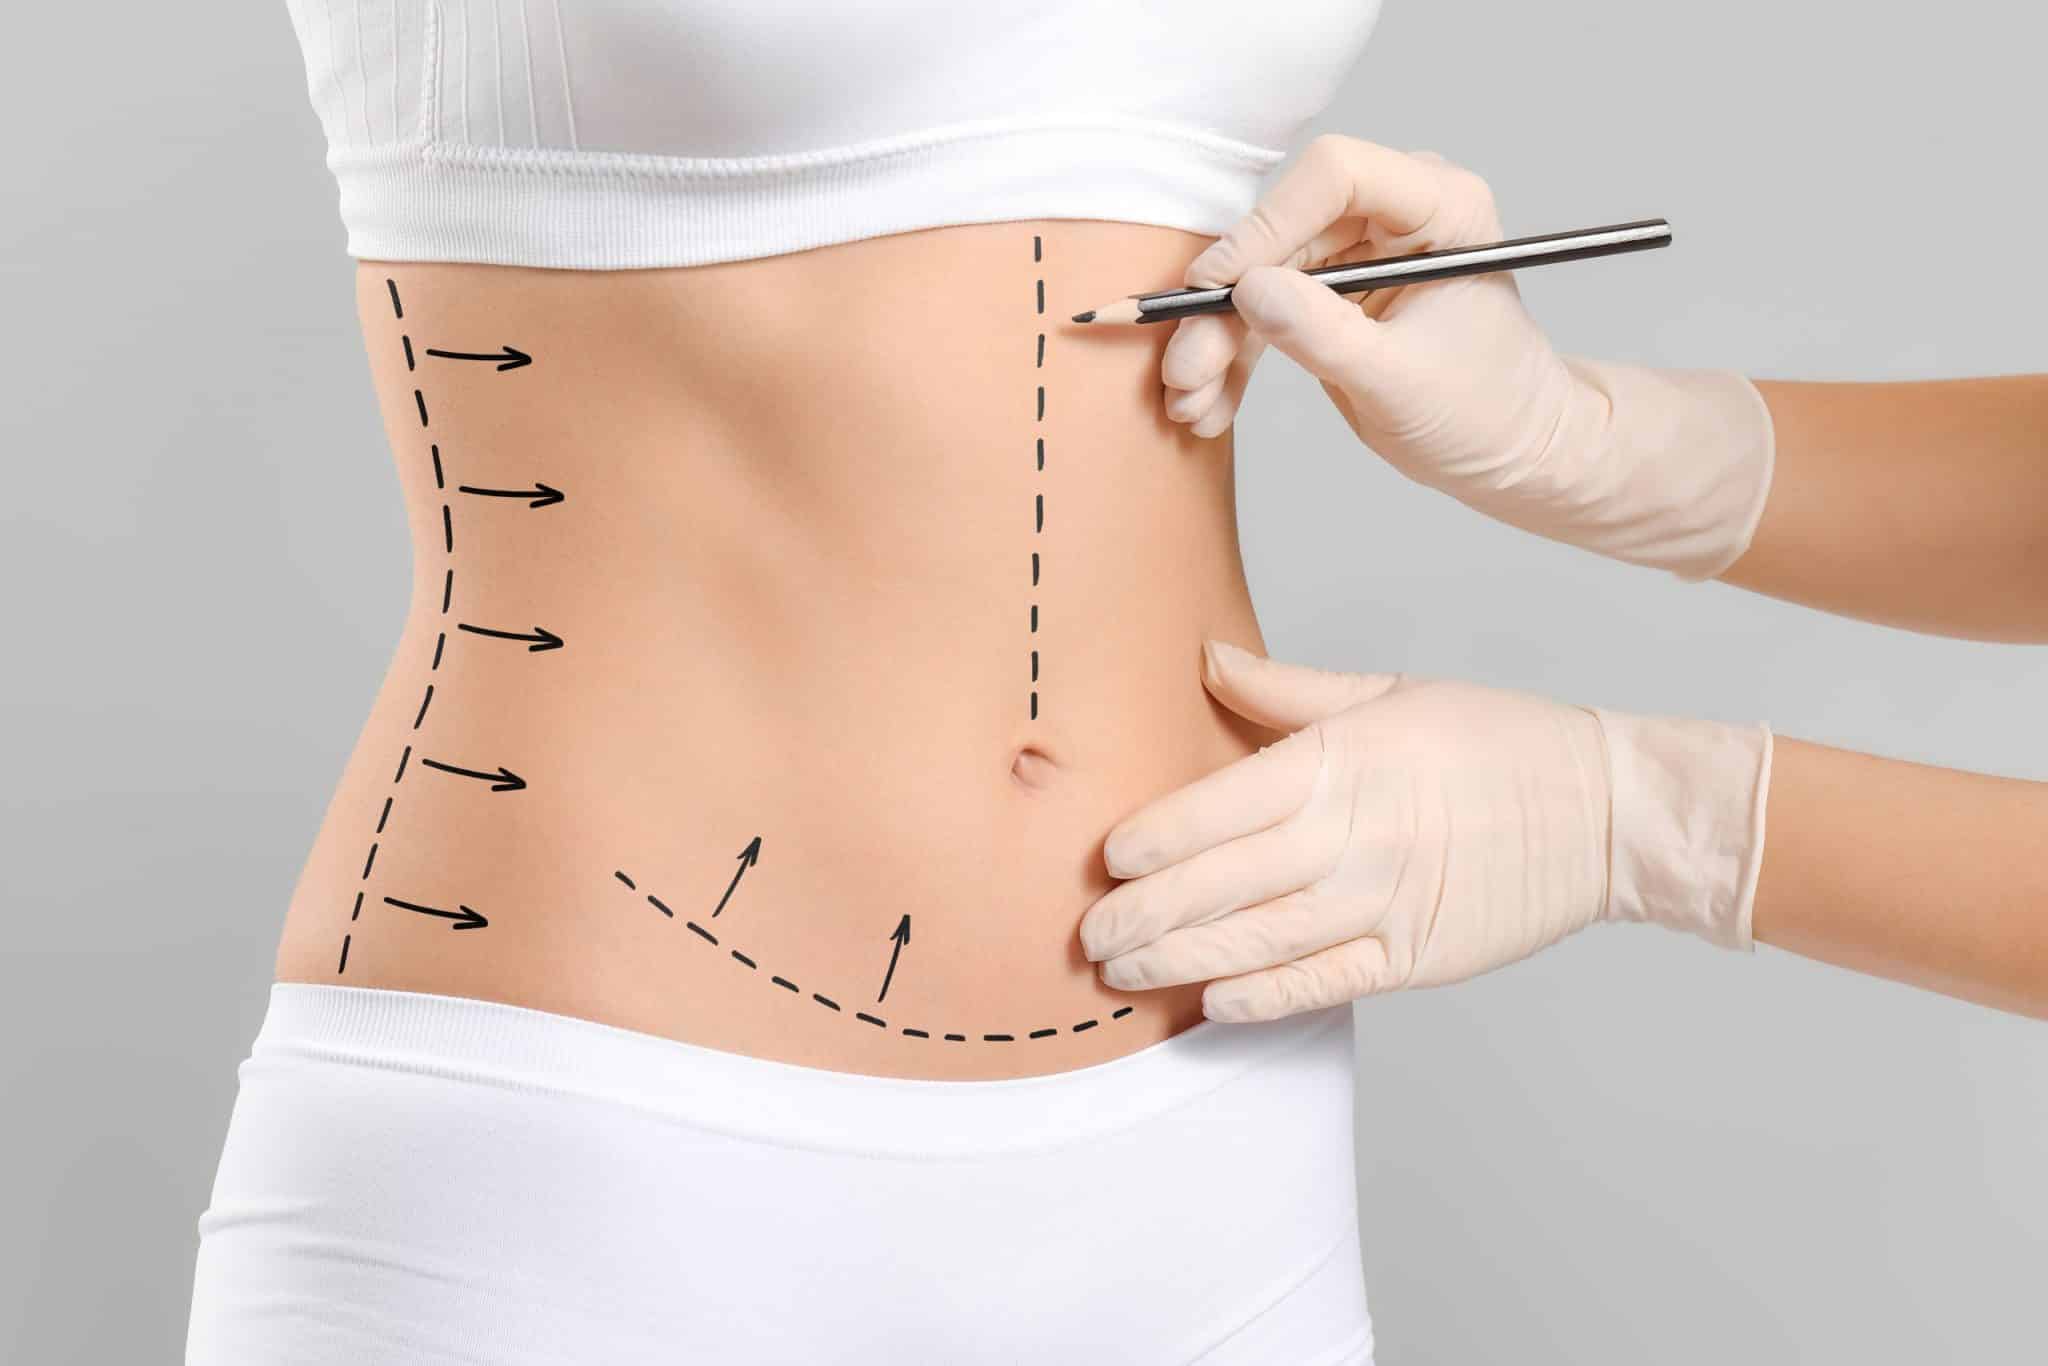 Transformative Body Contouring Post-Weight Loss - Cosmedical